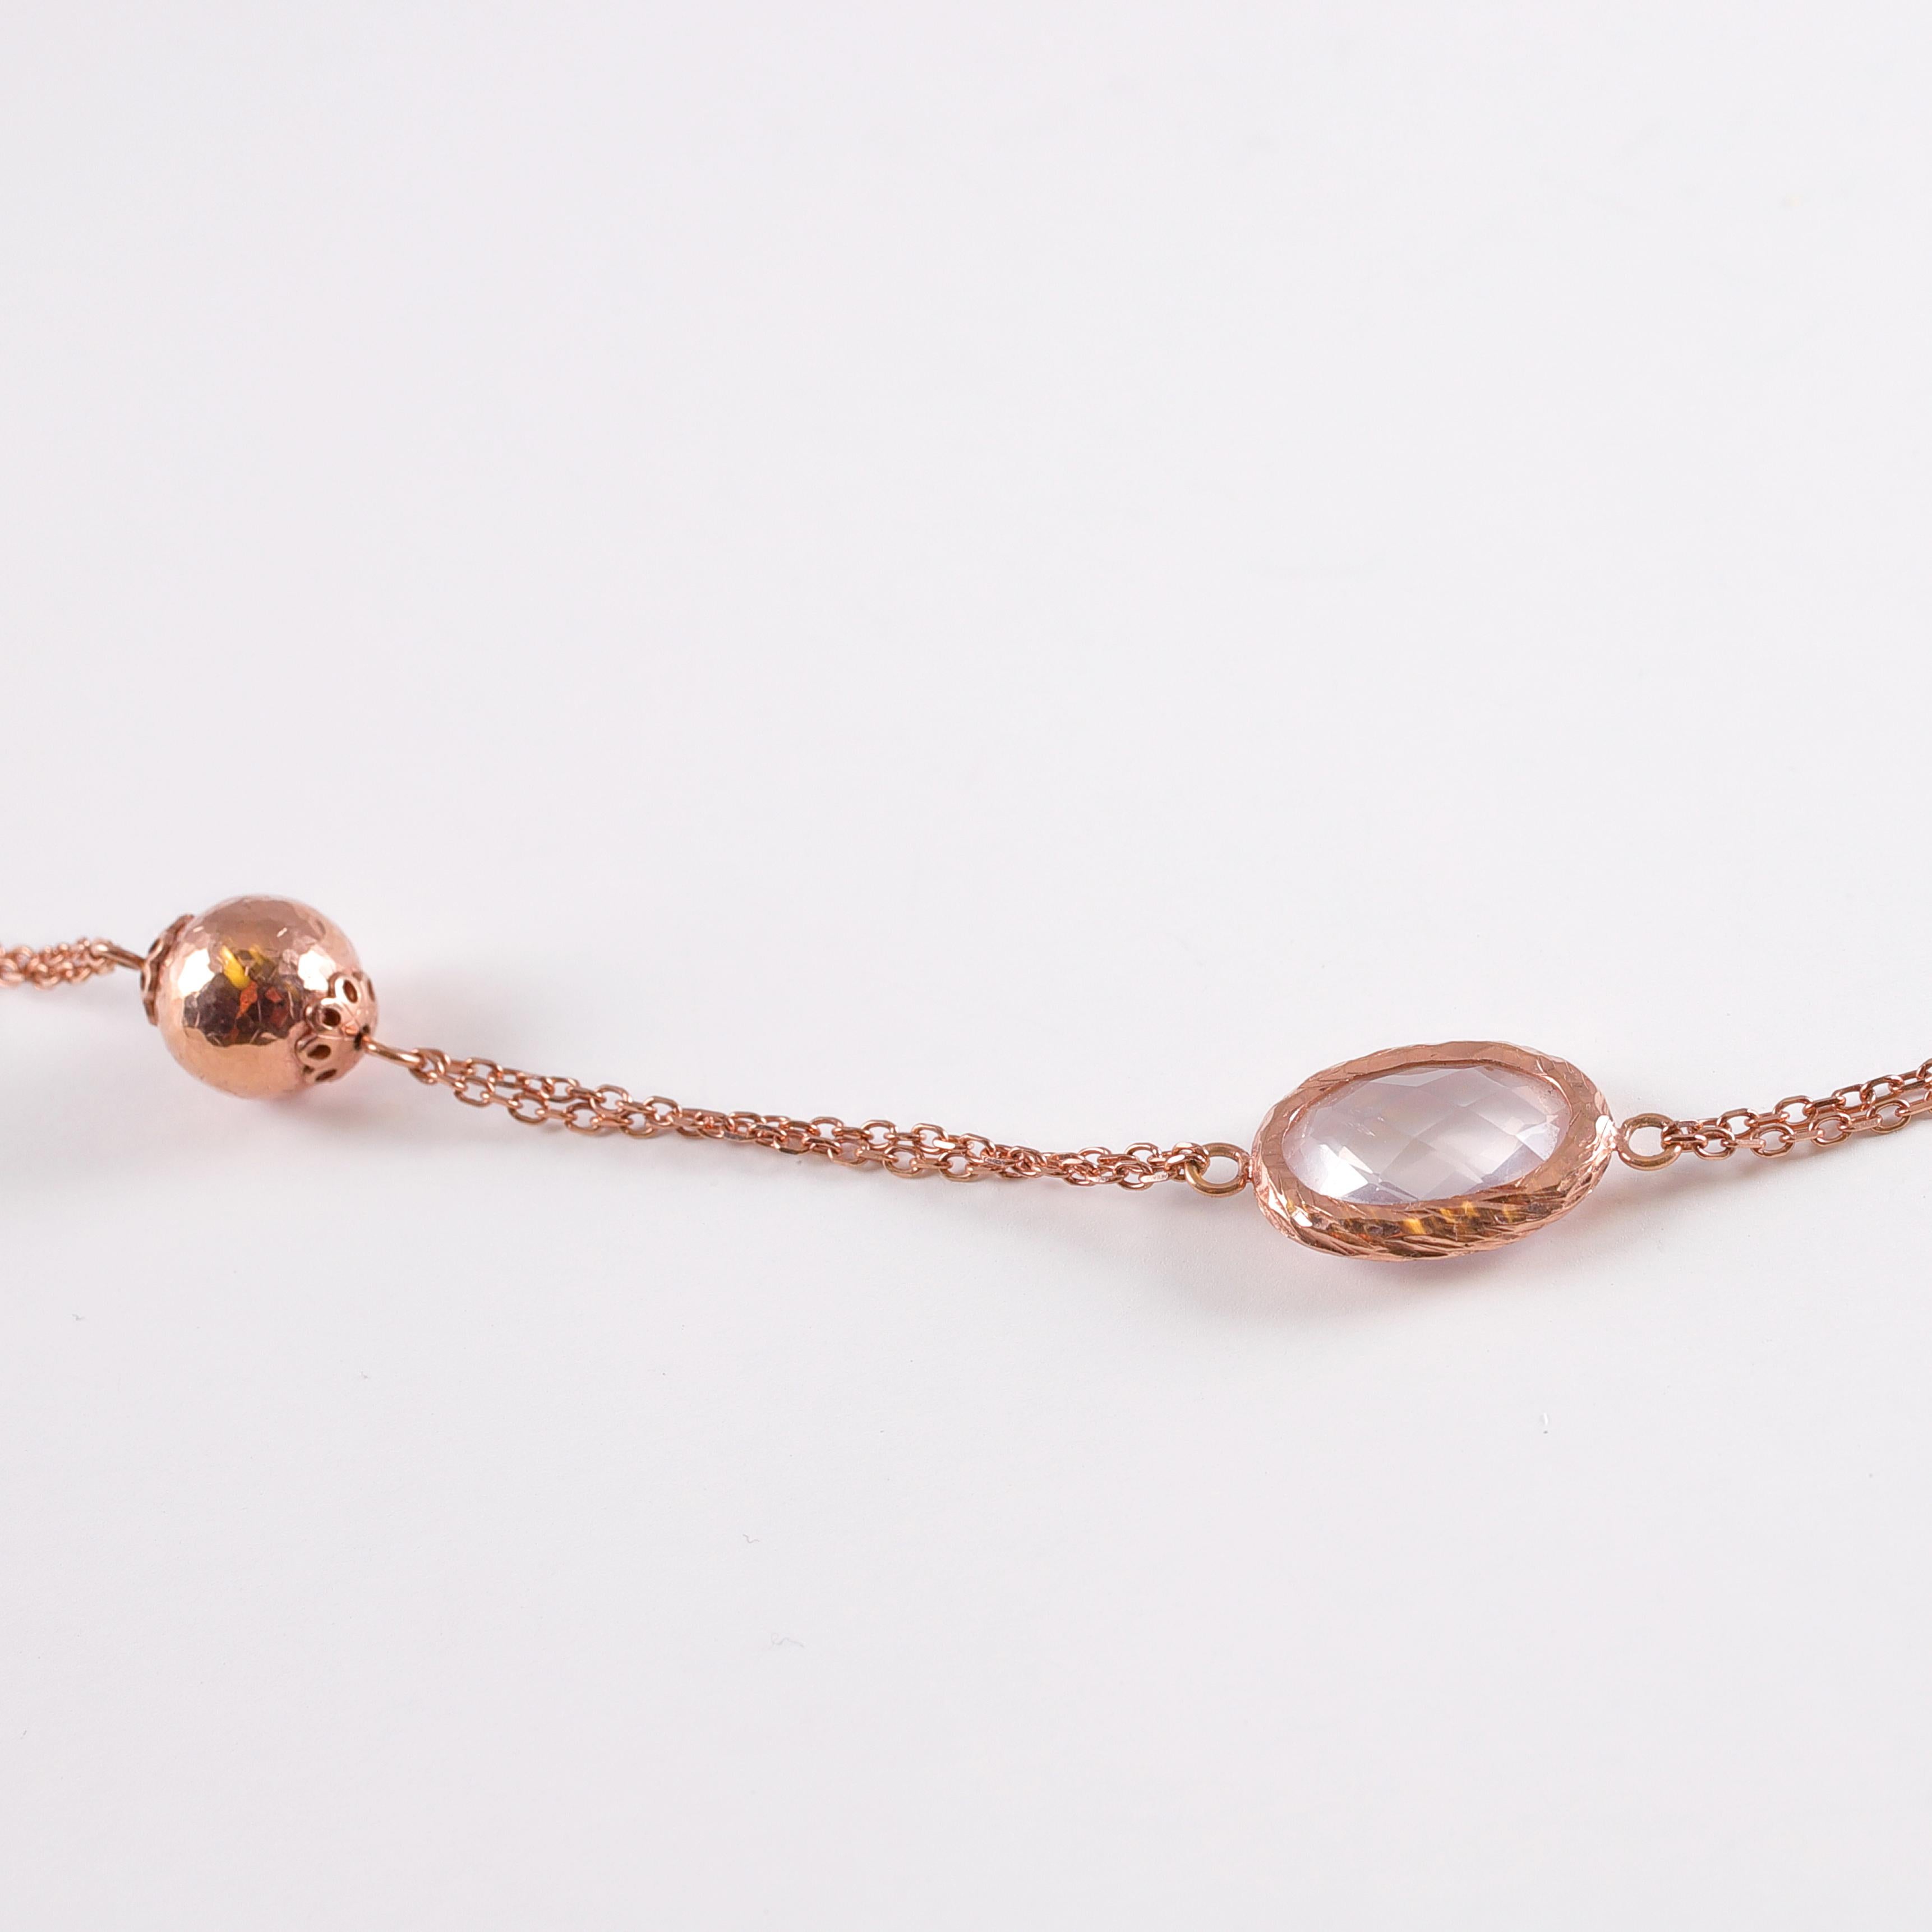 Wear it as one long strand, knot it or double it for 3 different looks!  This Italian stunner is in 14 karat rose gold, which is lovely with the beads, quartz and pearls.